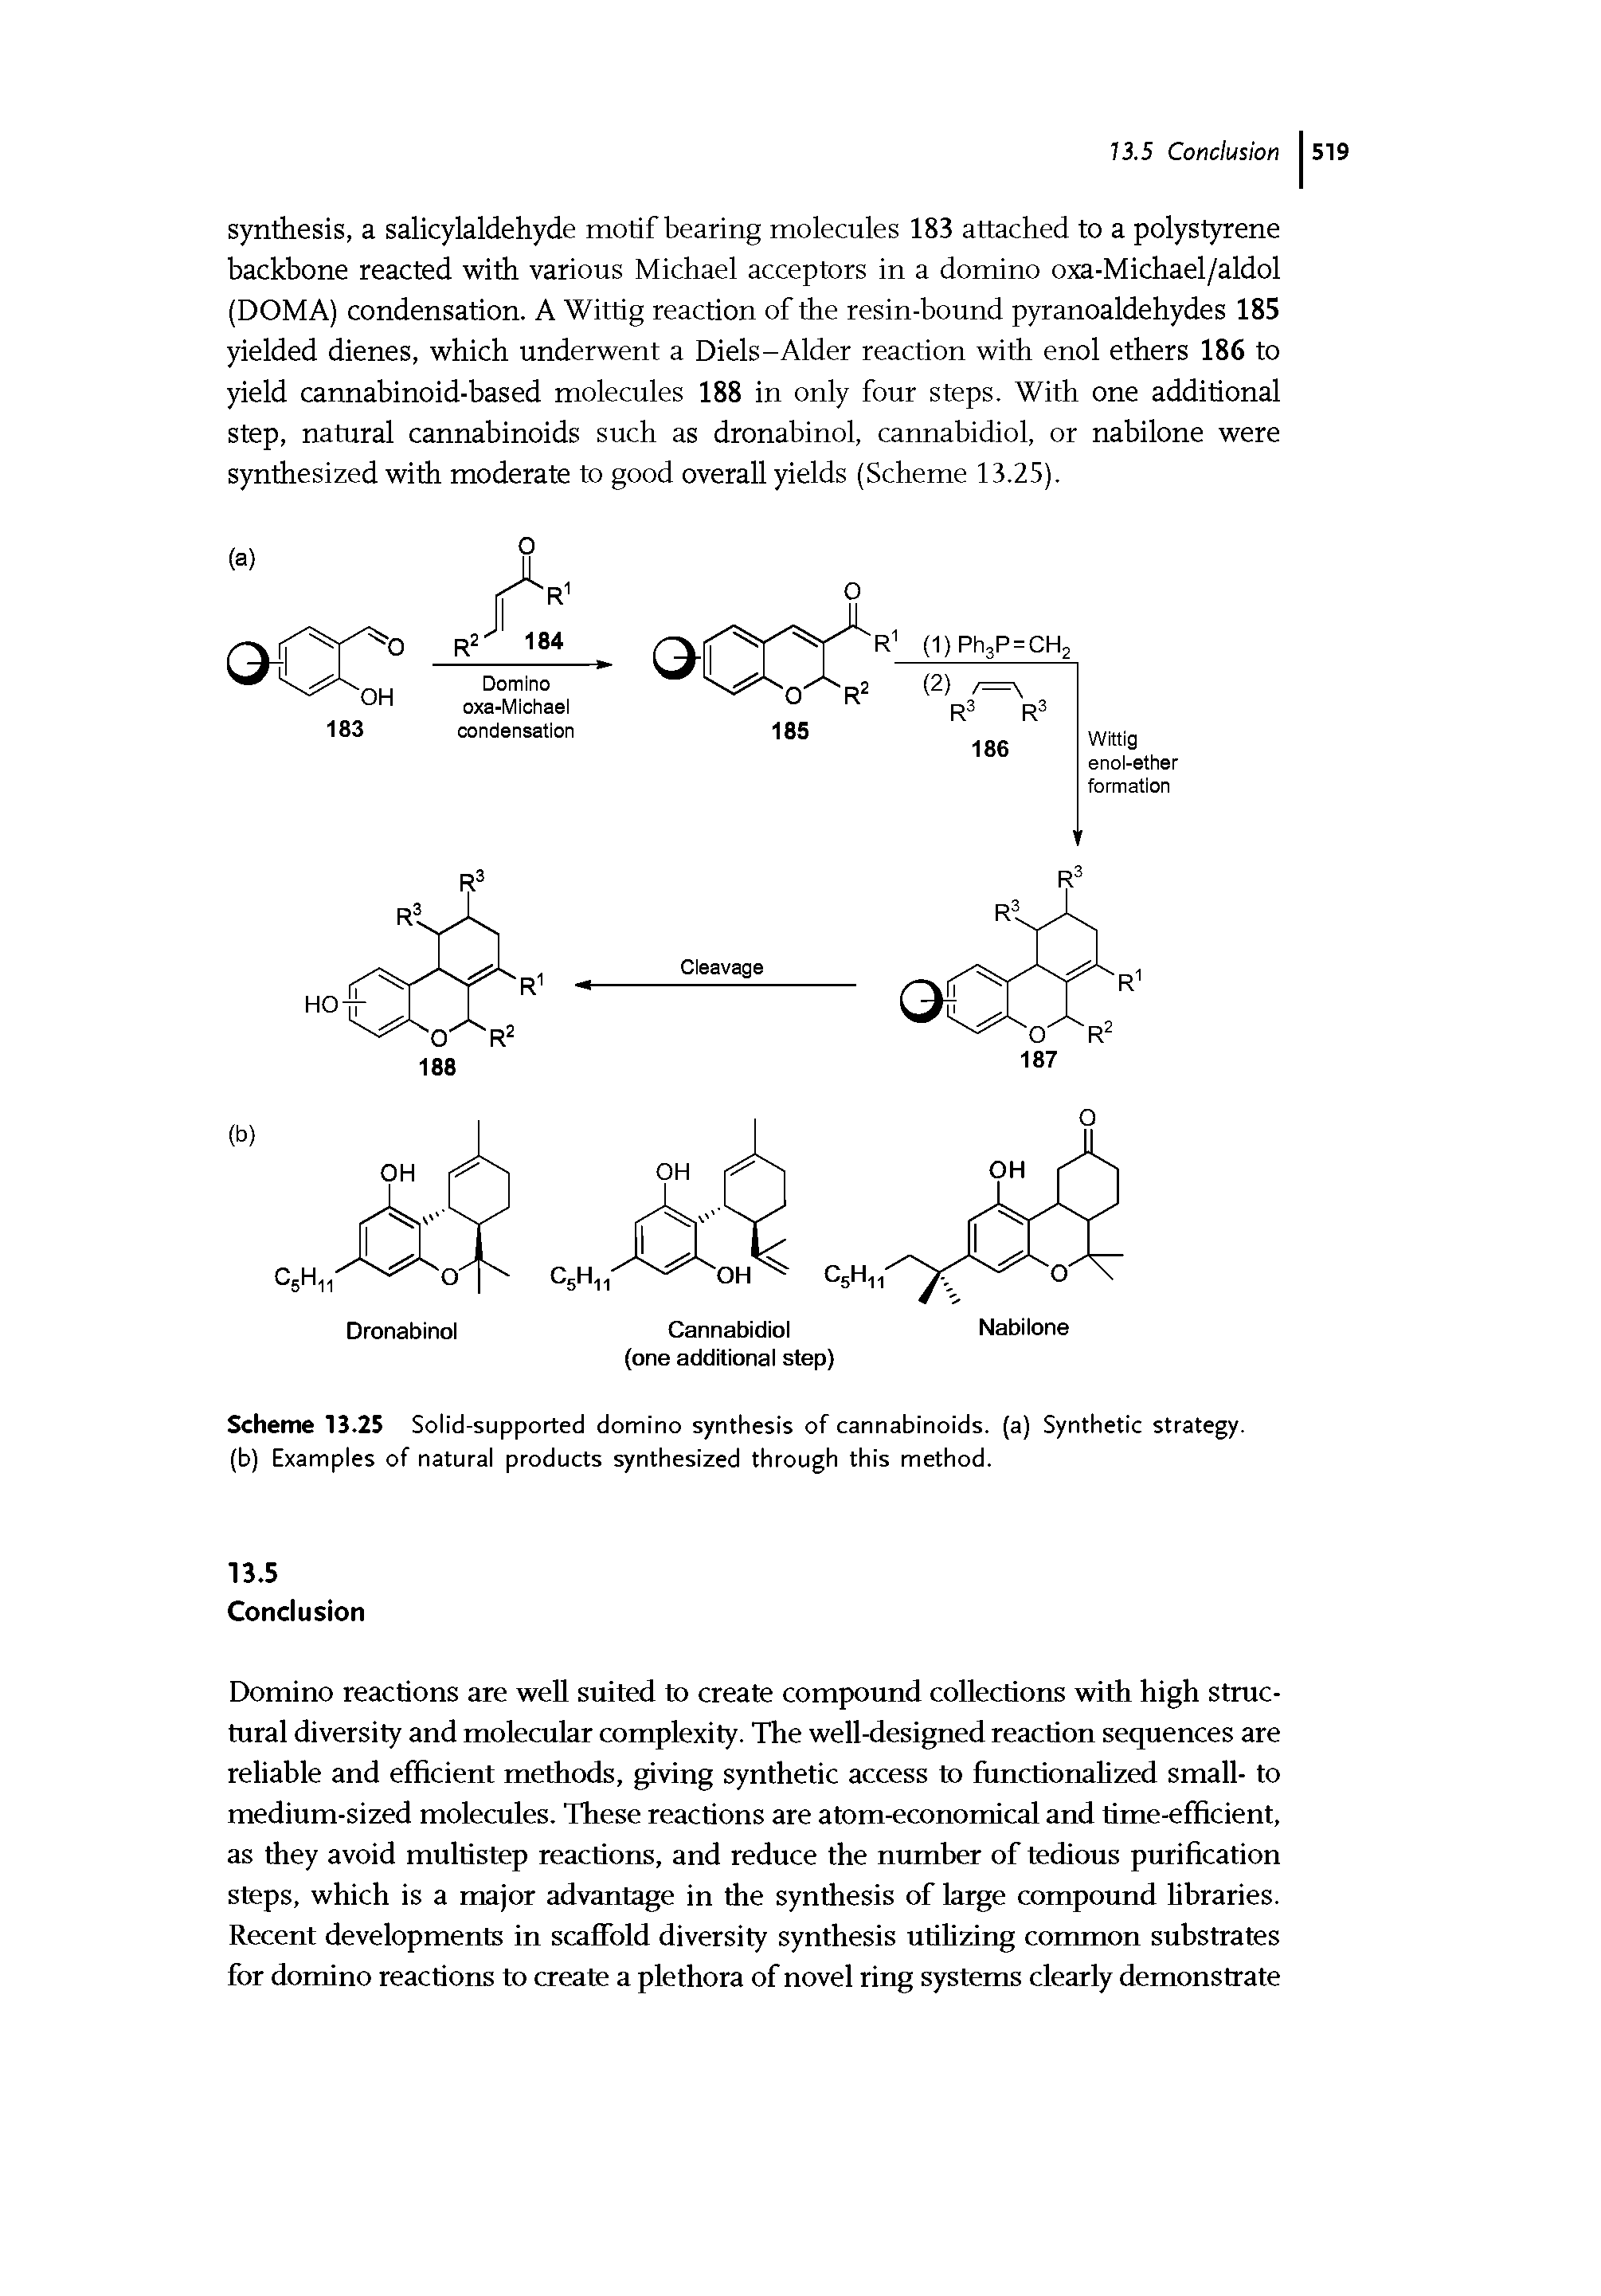 Scheme 13.25 Solid-supported domino synthesis of cannabinoids. (a) Synthetic strategy, (b) Examples of natural products synthesized through this method.